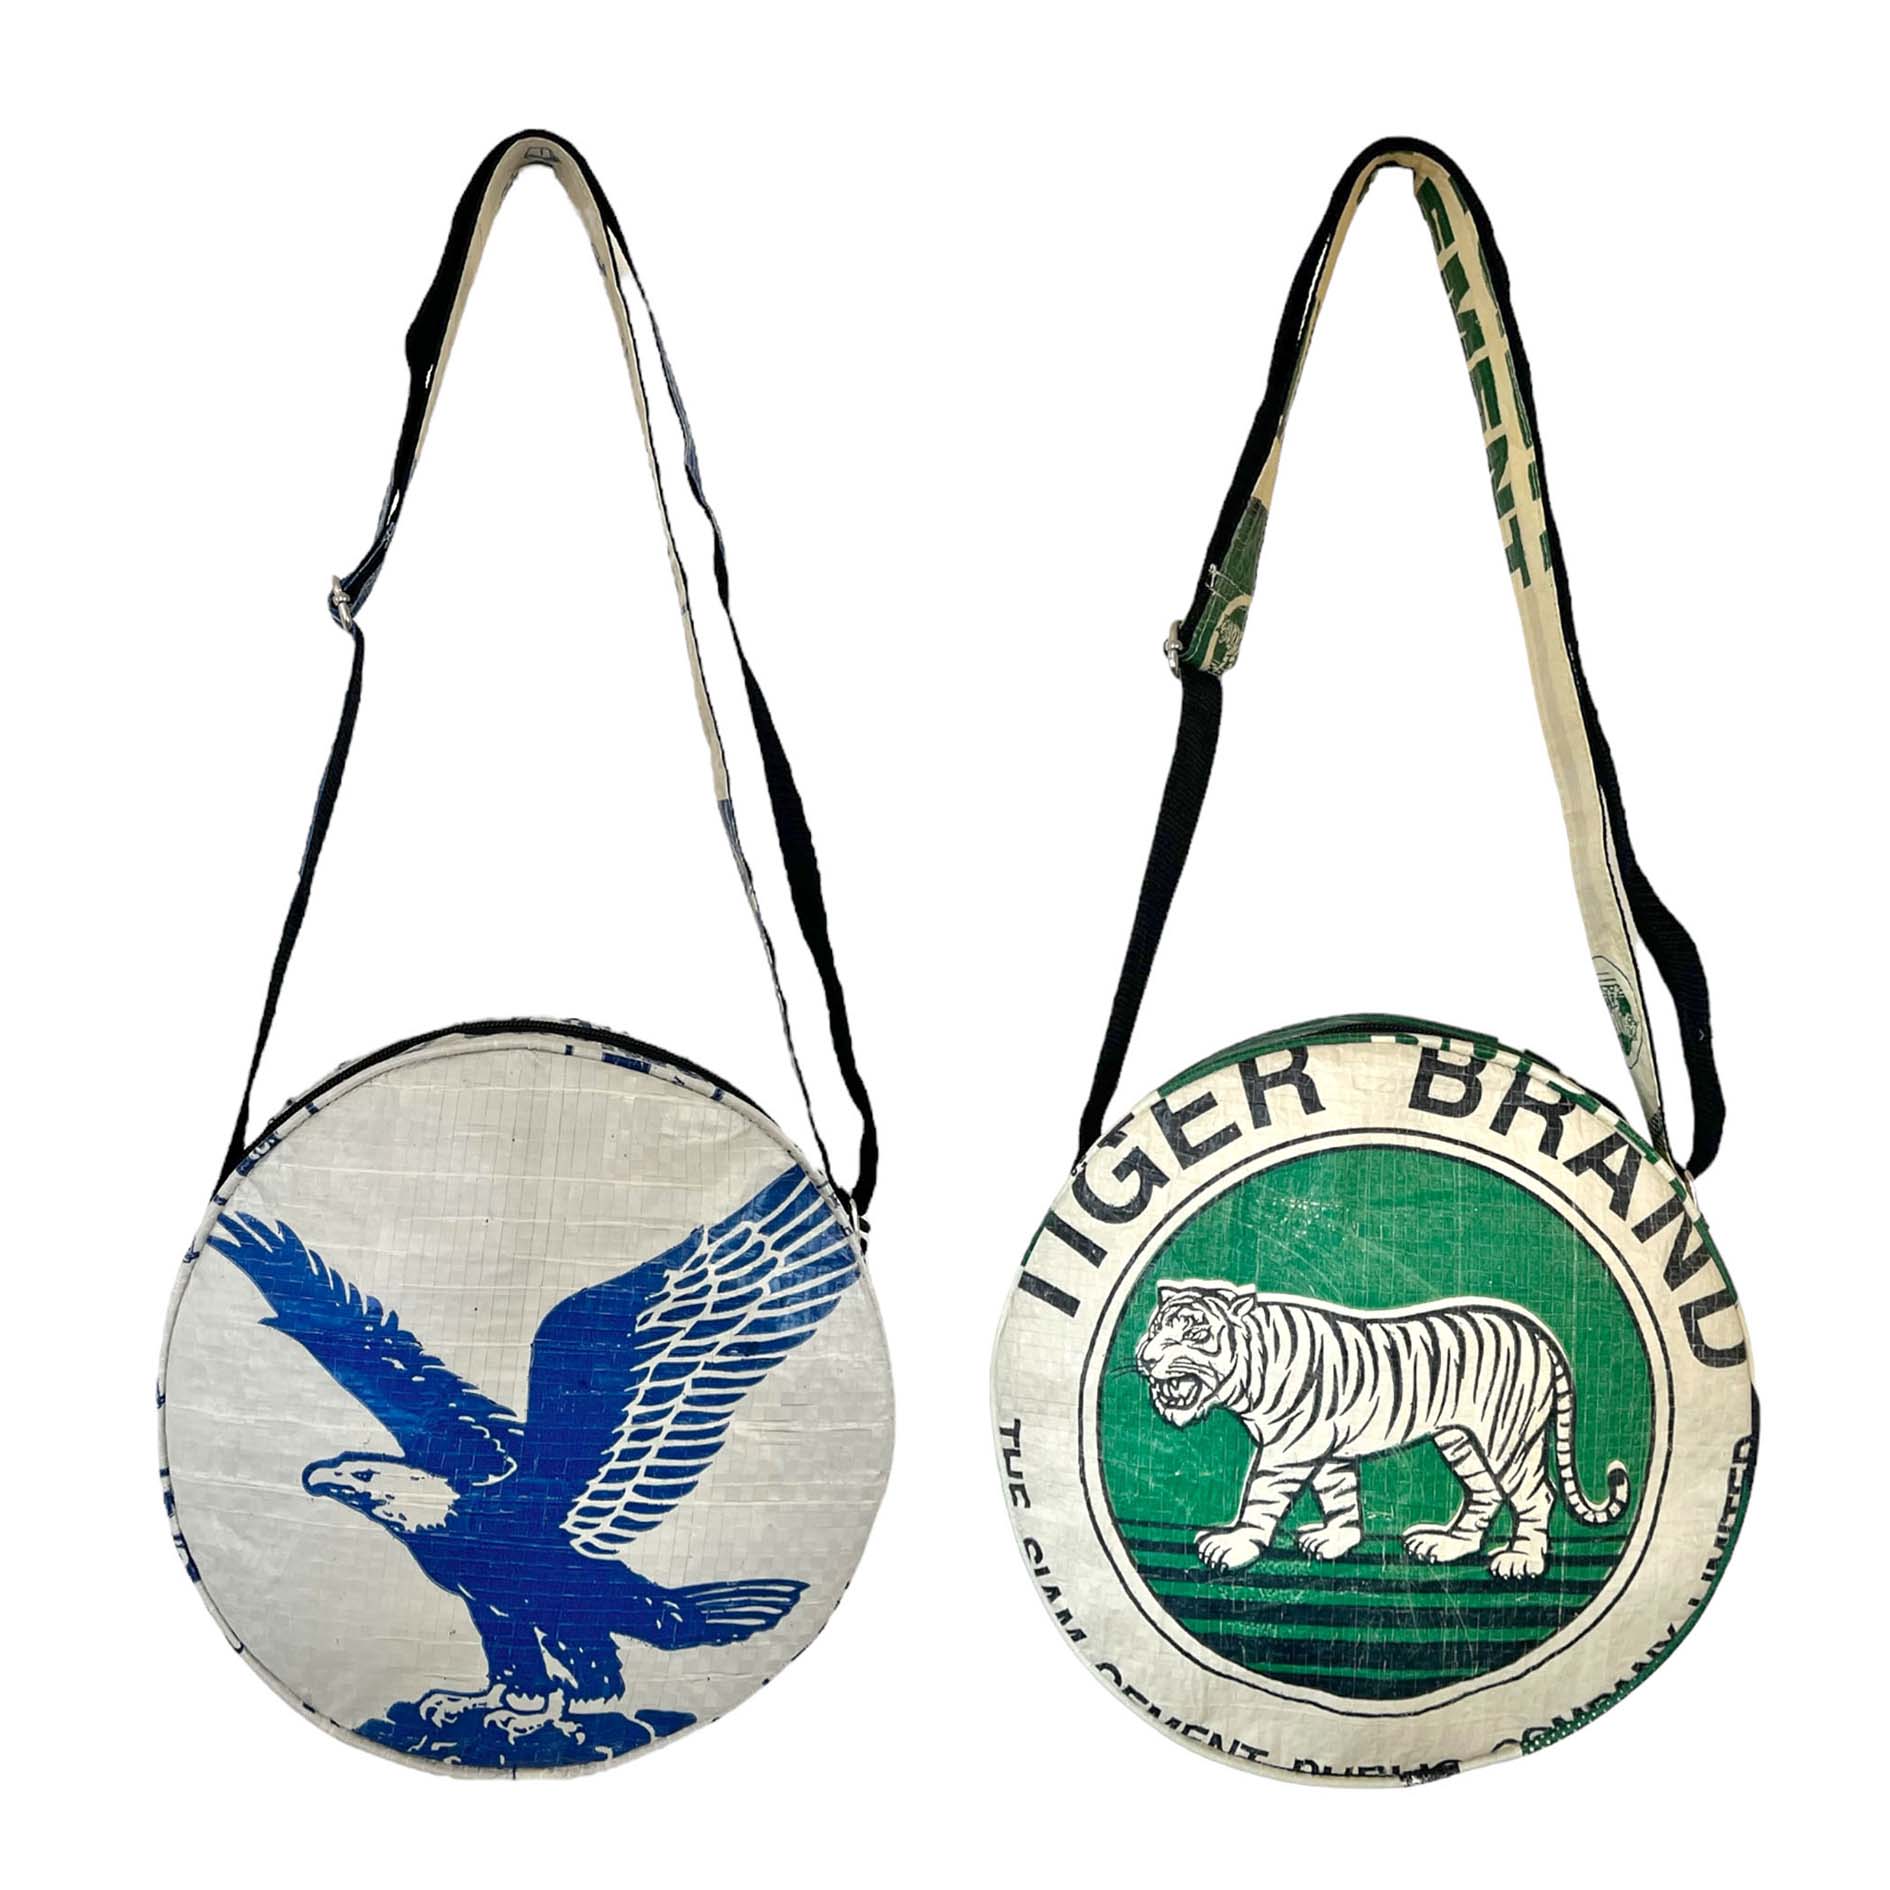 Recycled material round bags with animal prints . Ethical bags.